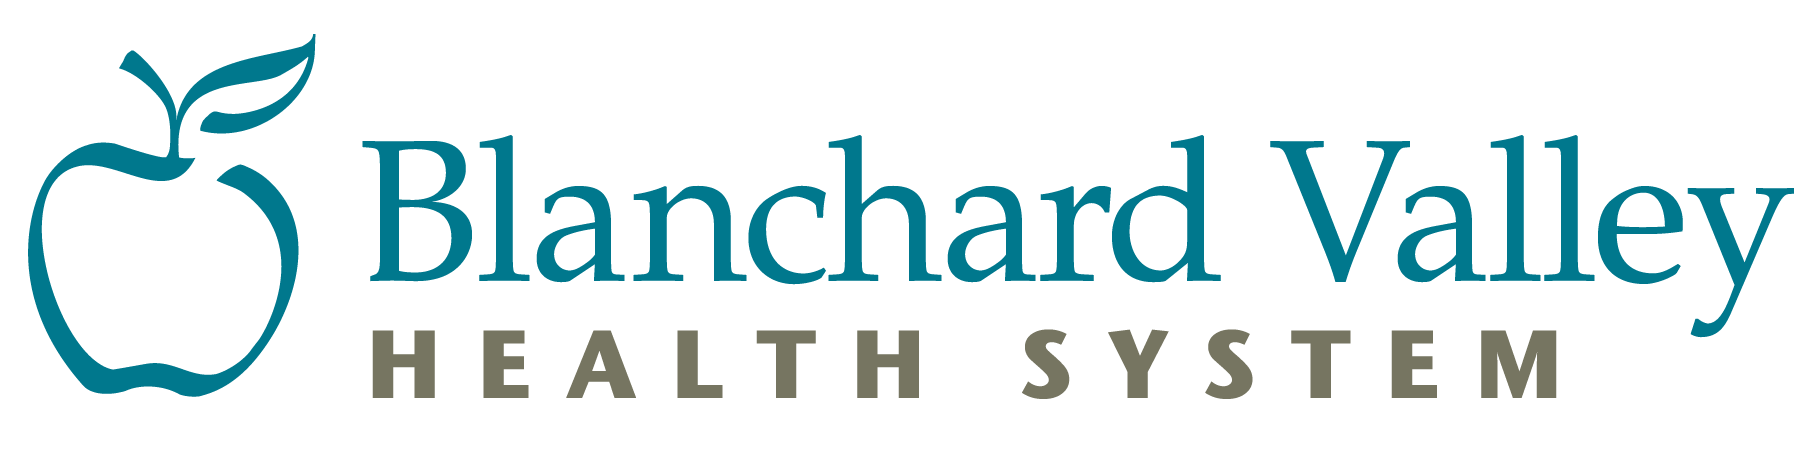 Outpatient Family Medicine Physician - Midwest Independent Nonprofit - Part-time or Full-time, Option of 8s/10s/12s - Blanchard Valley Health System